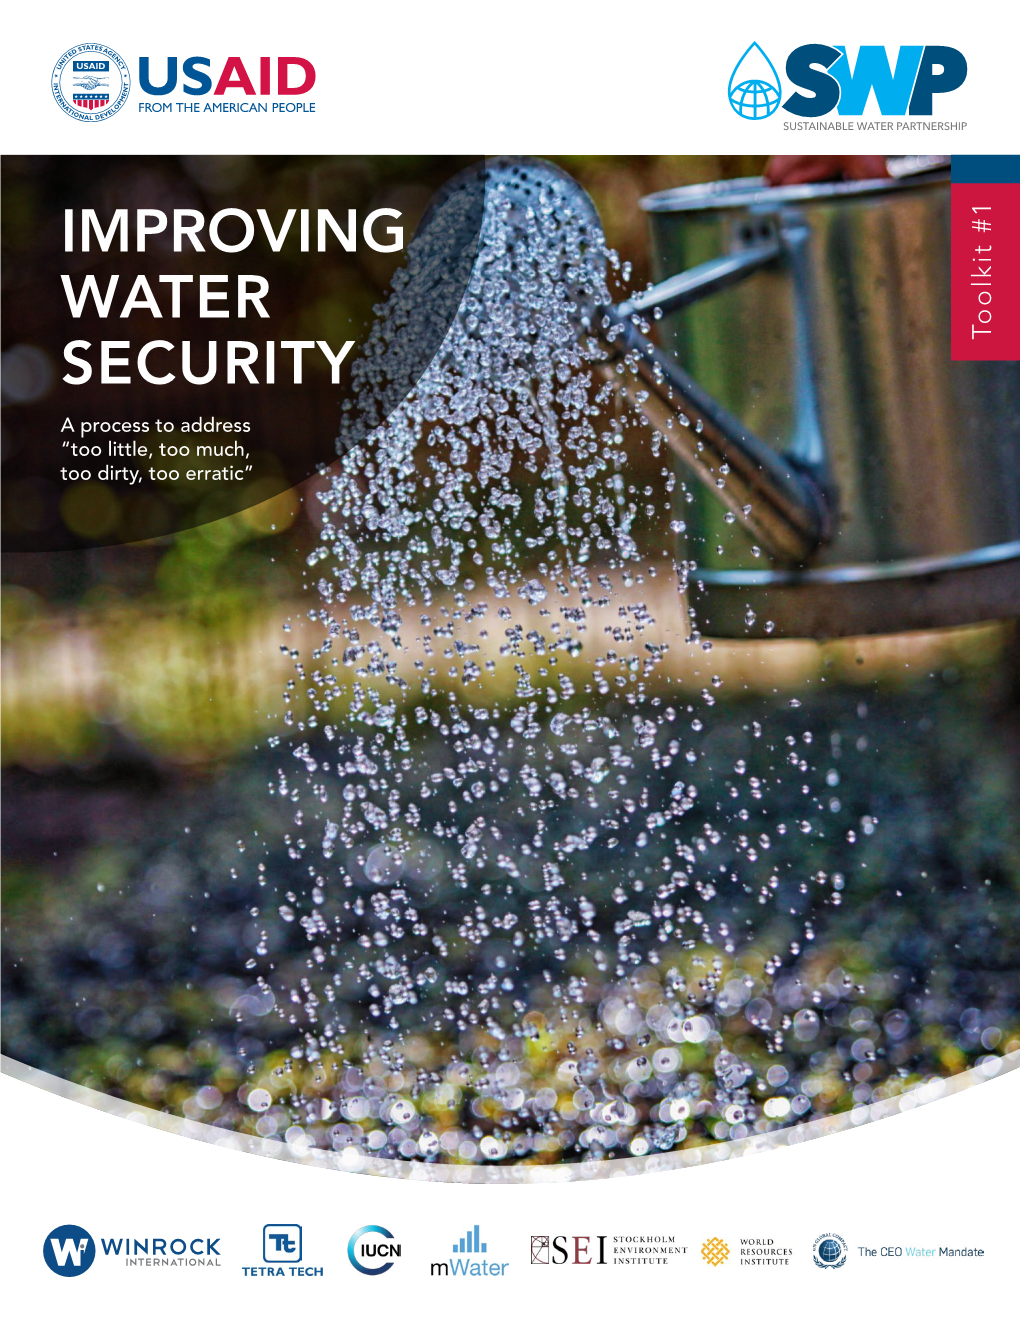 Improving Water Security Is About Focusing Actors and Resources EP 3 on Key Water Risks